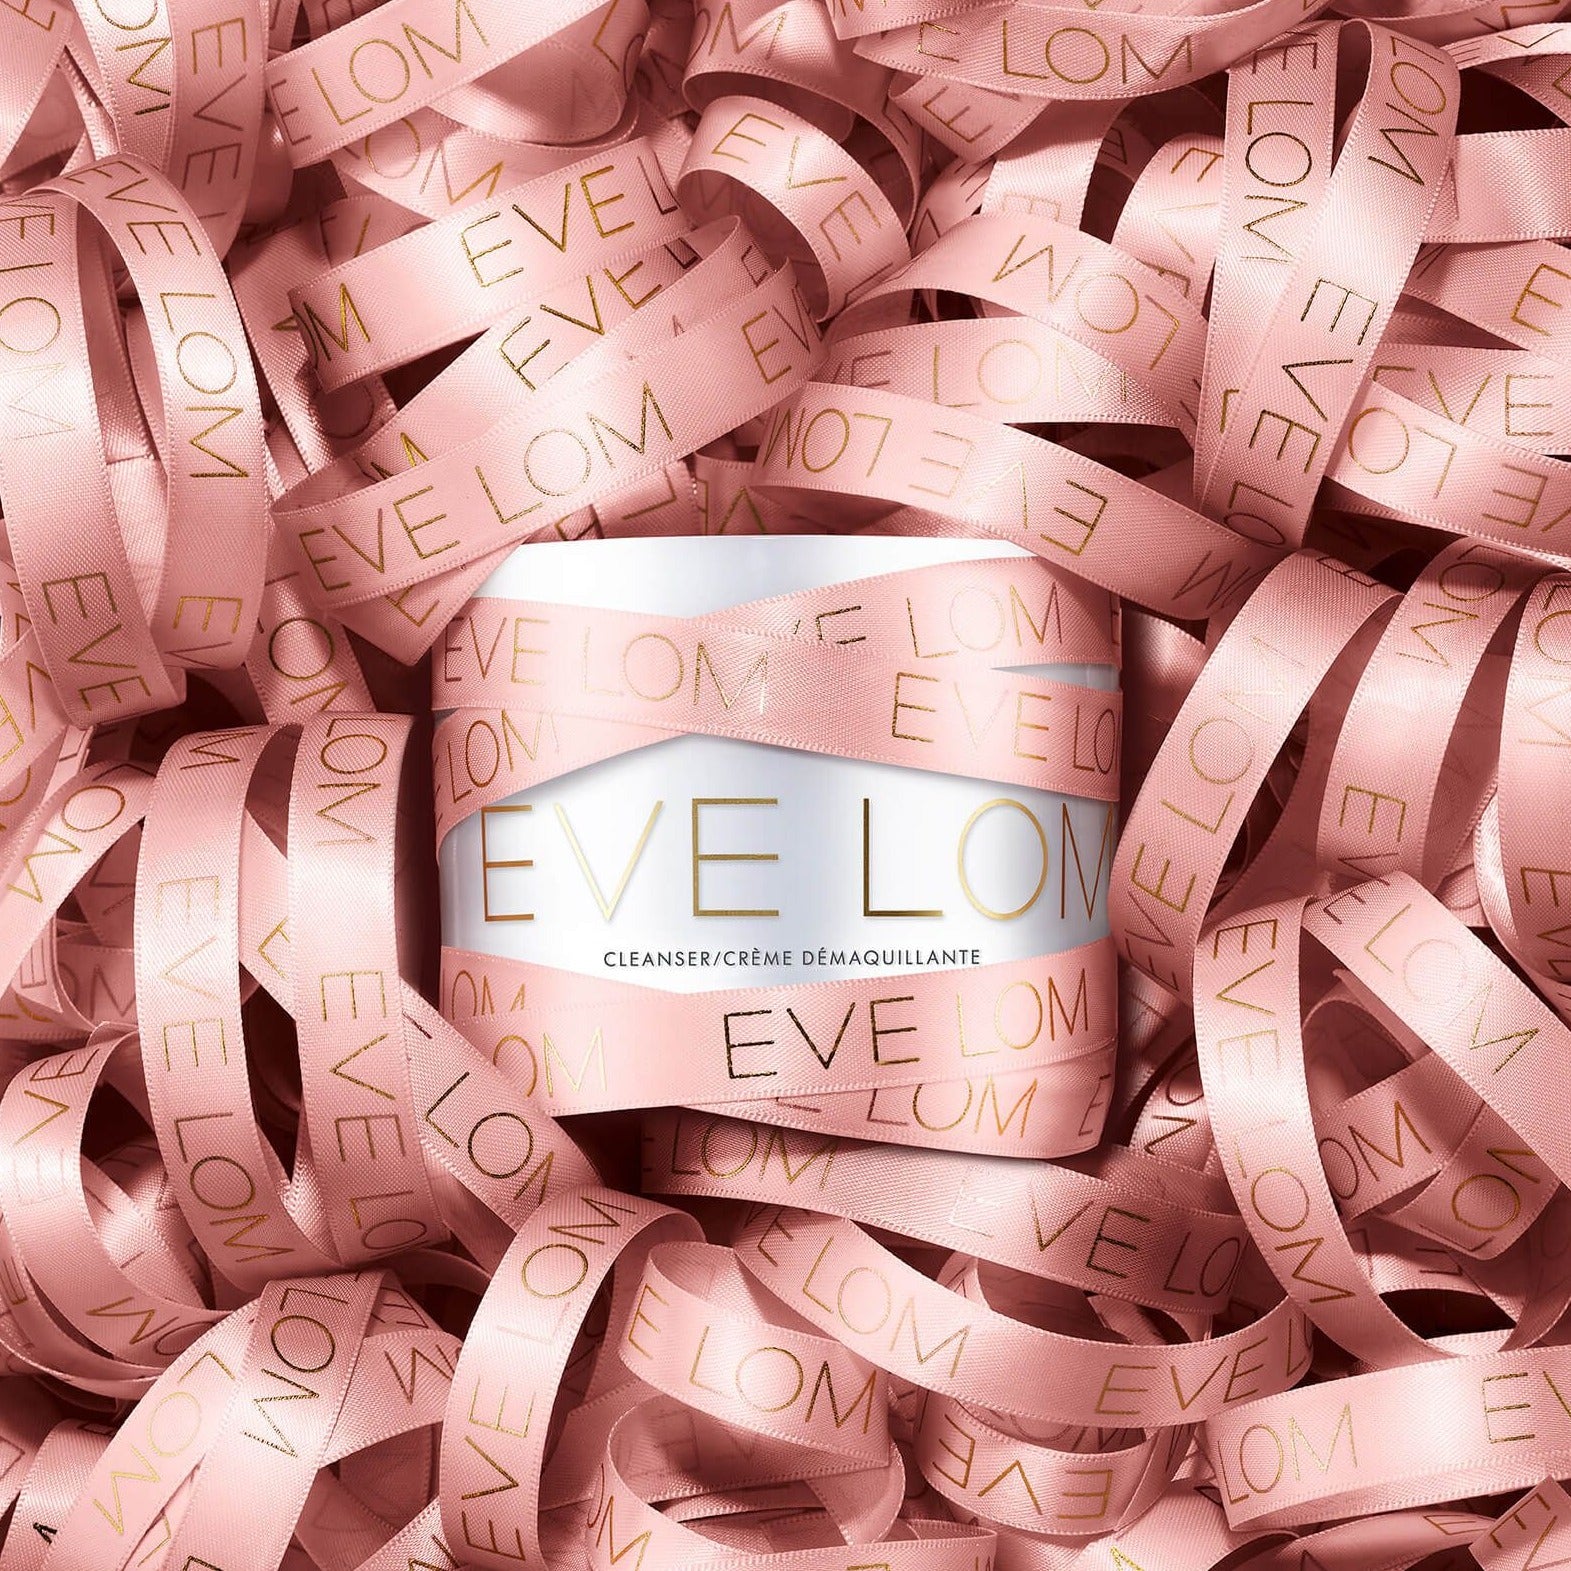 Eve Lom's iconic Cleanser deep cleanses without drying or stripping the skin and removes even the most stubborn of waterproof makeup.